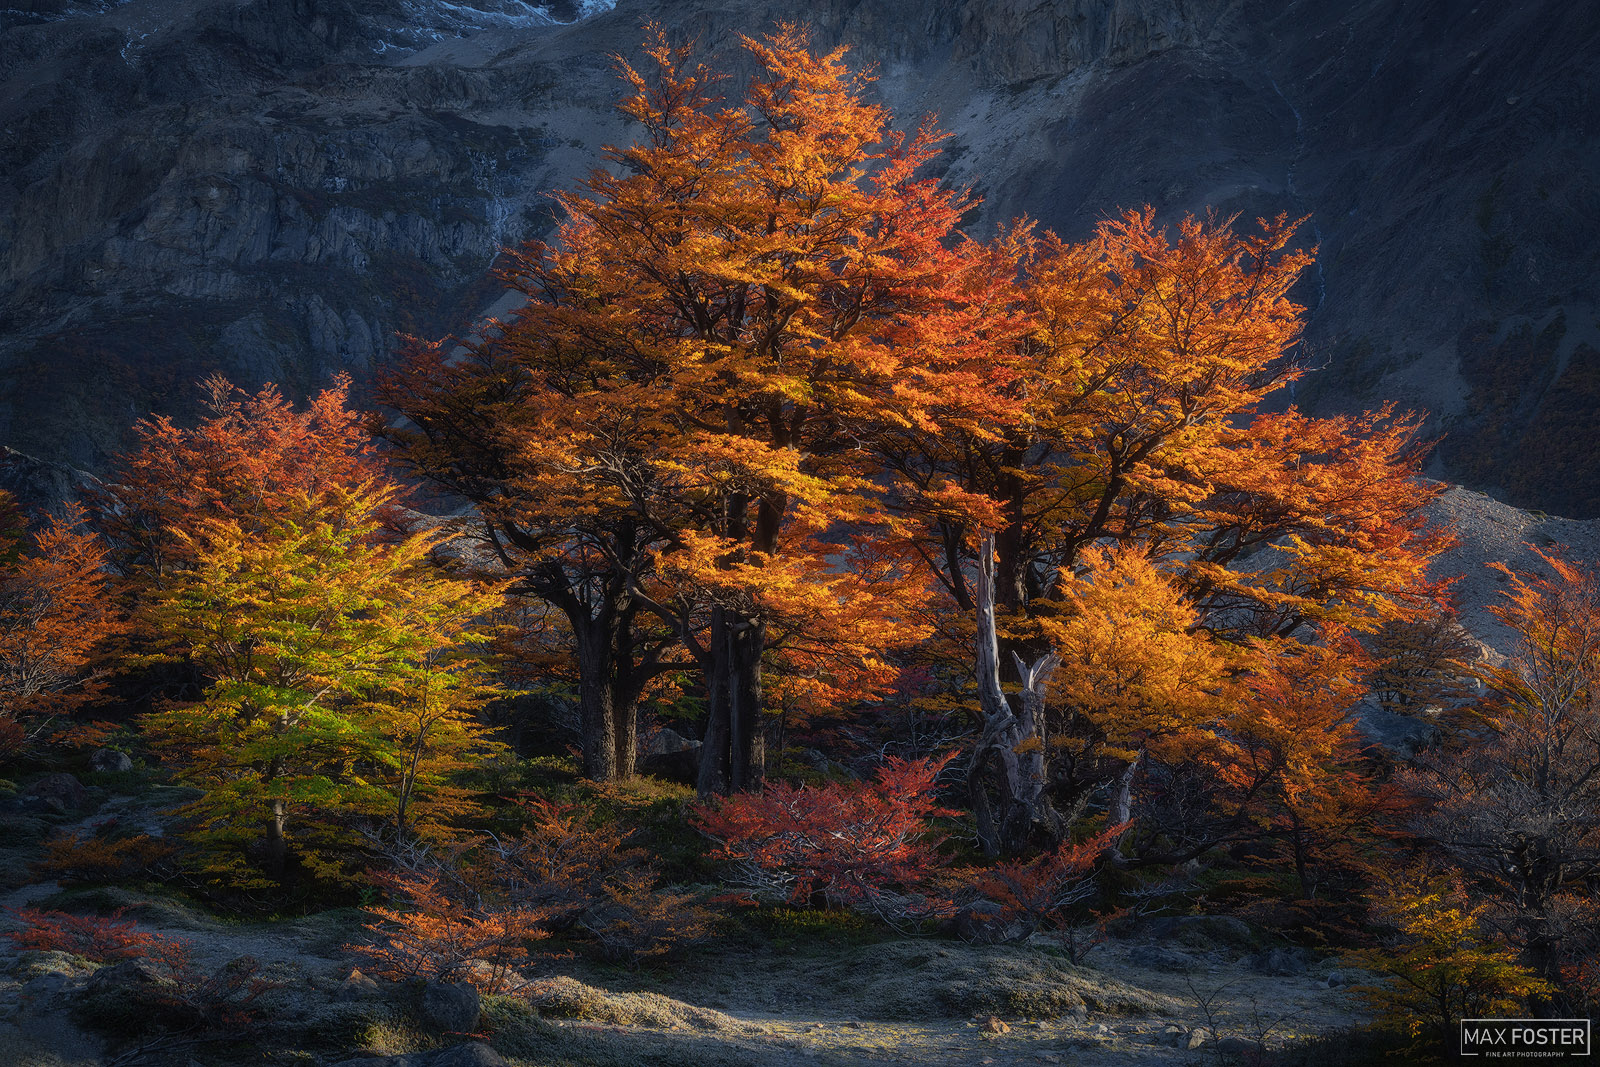 Enrich your living space with Luminous, Max Foster's limited edition photographic print of Lenga trees showcasing peak fall color...